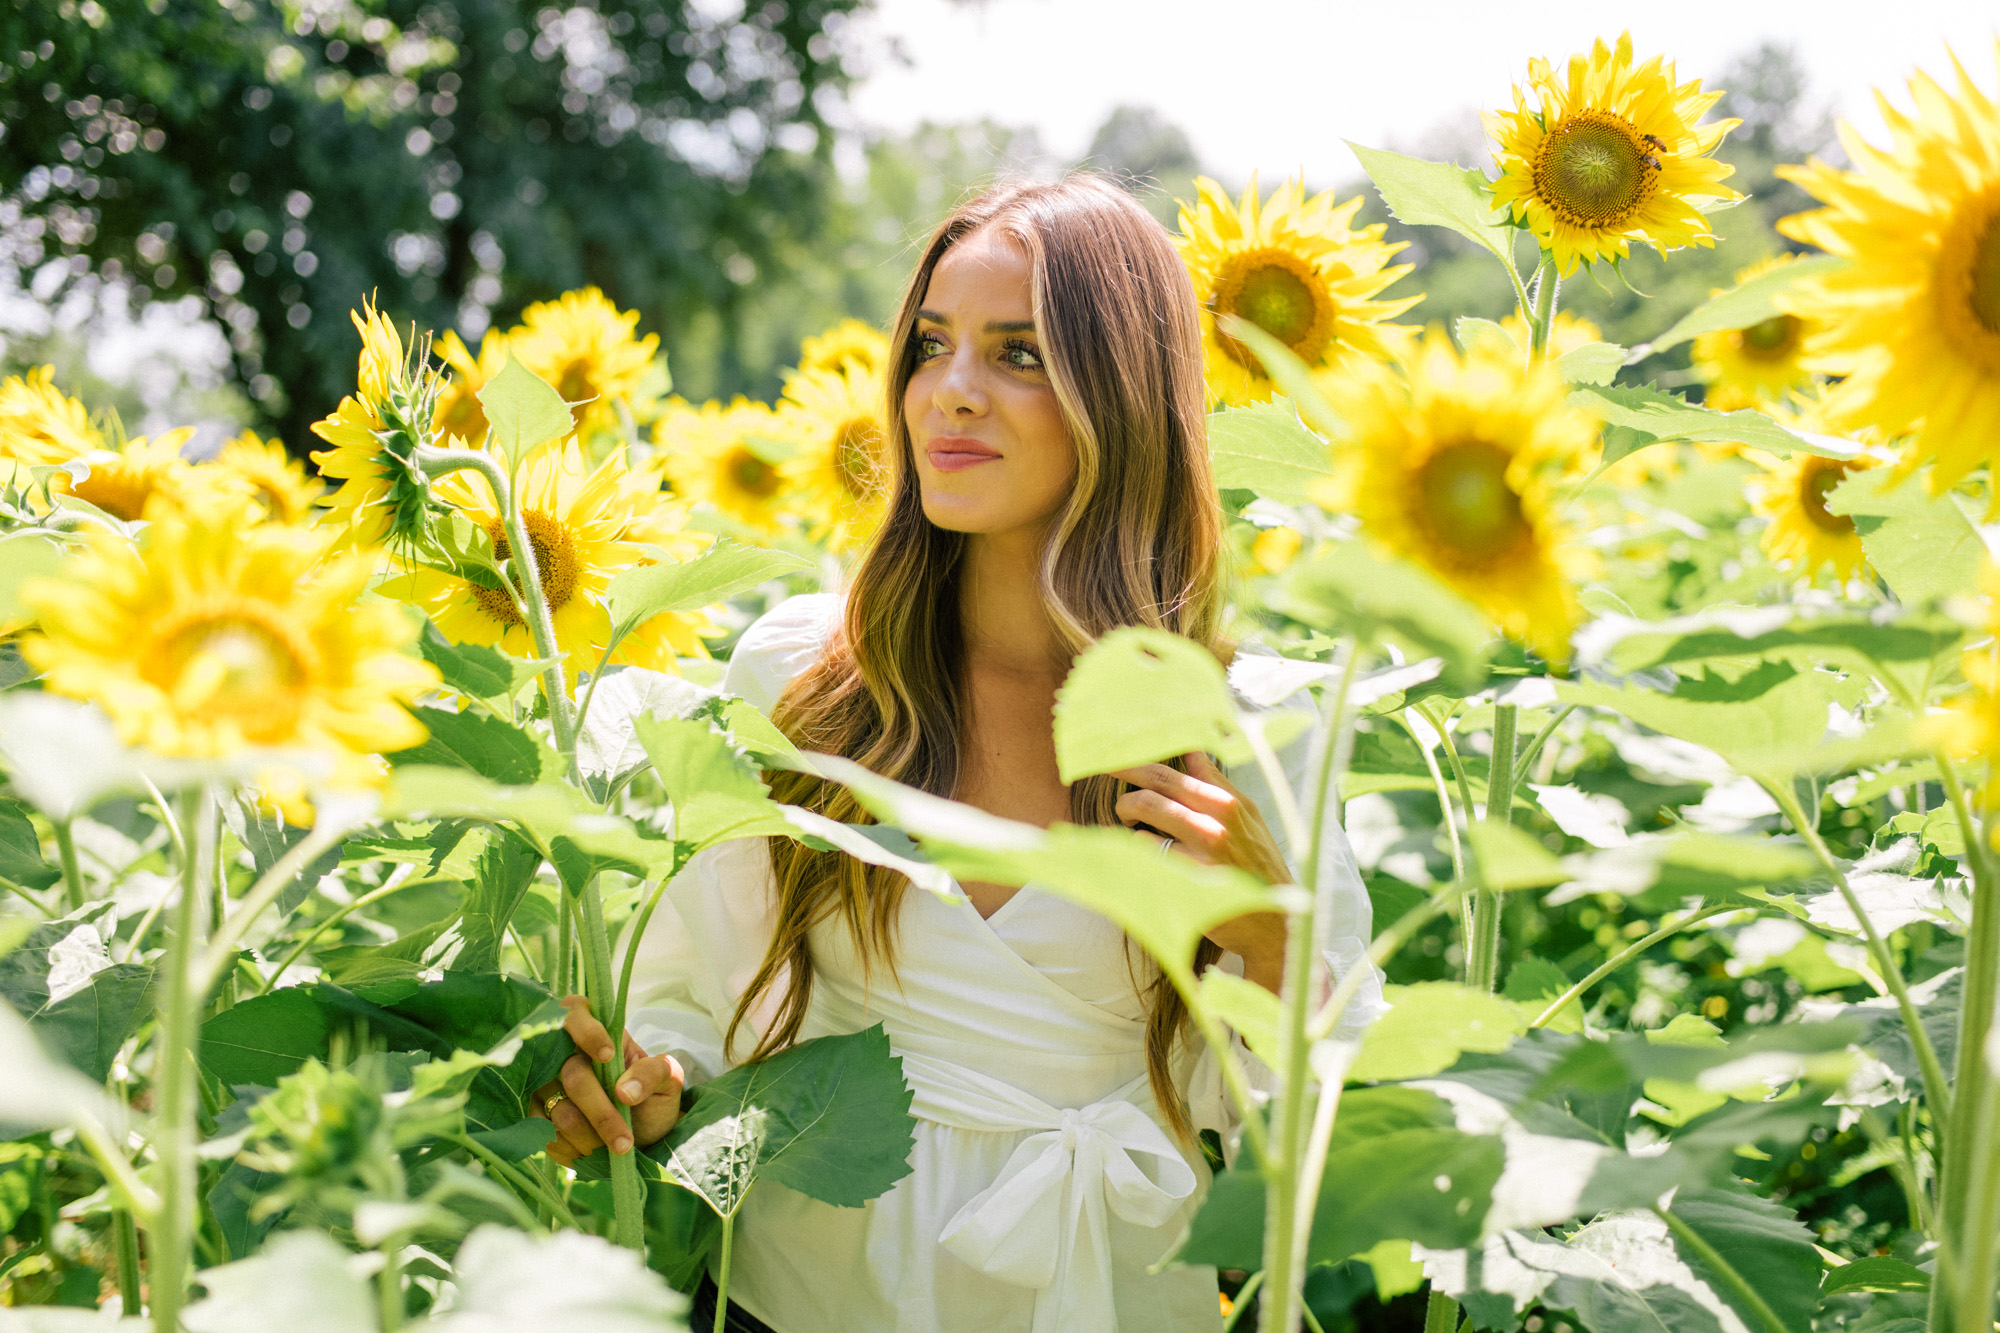 gal-meets-glam-sunflowers-asheville-1003614